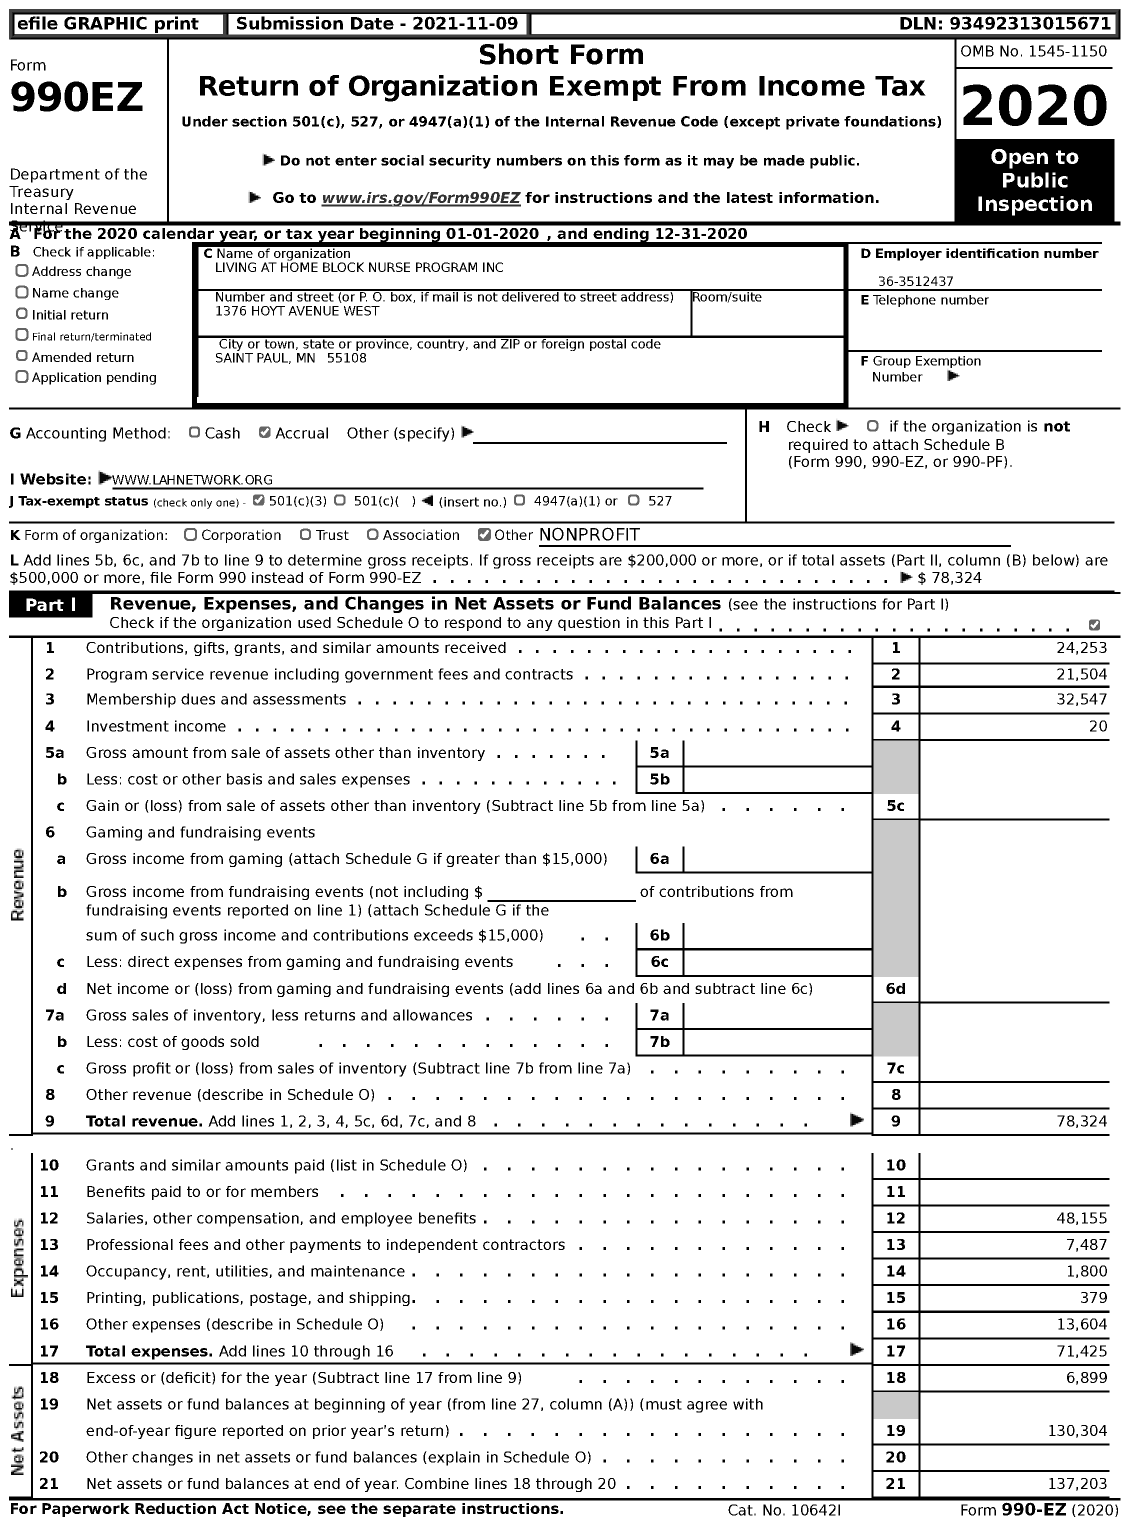 Image of first page of 2020 Form 990EZ for Living at Home Block Nurse Program